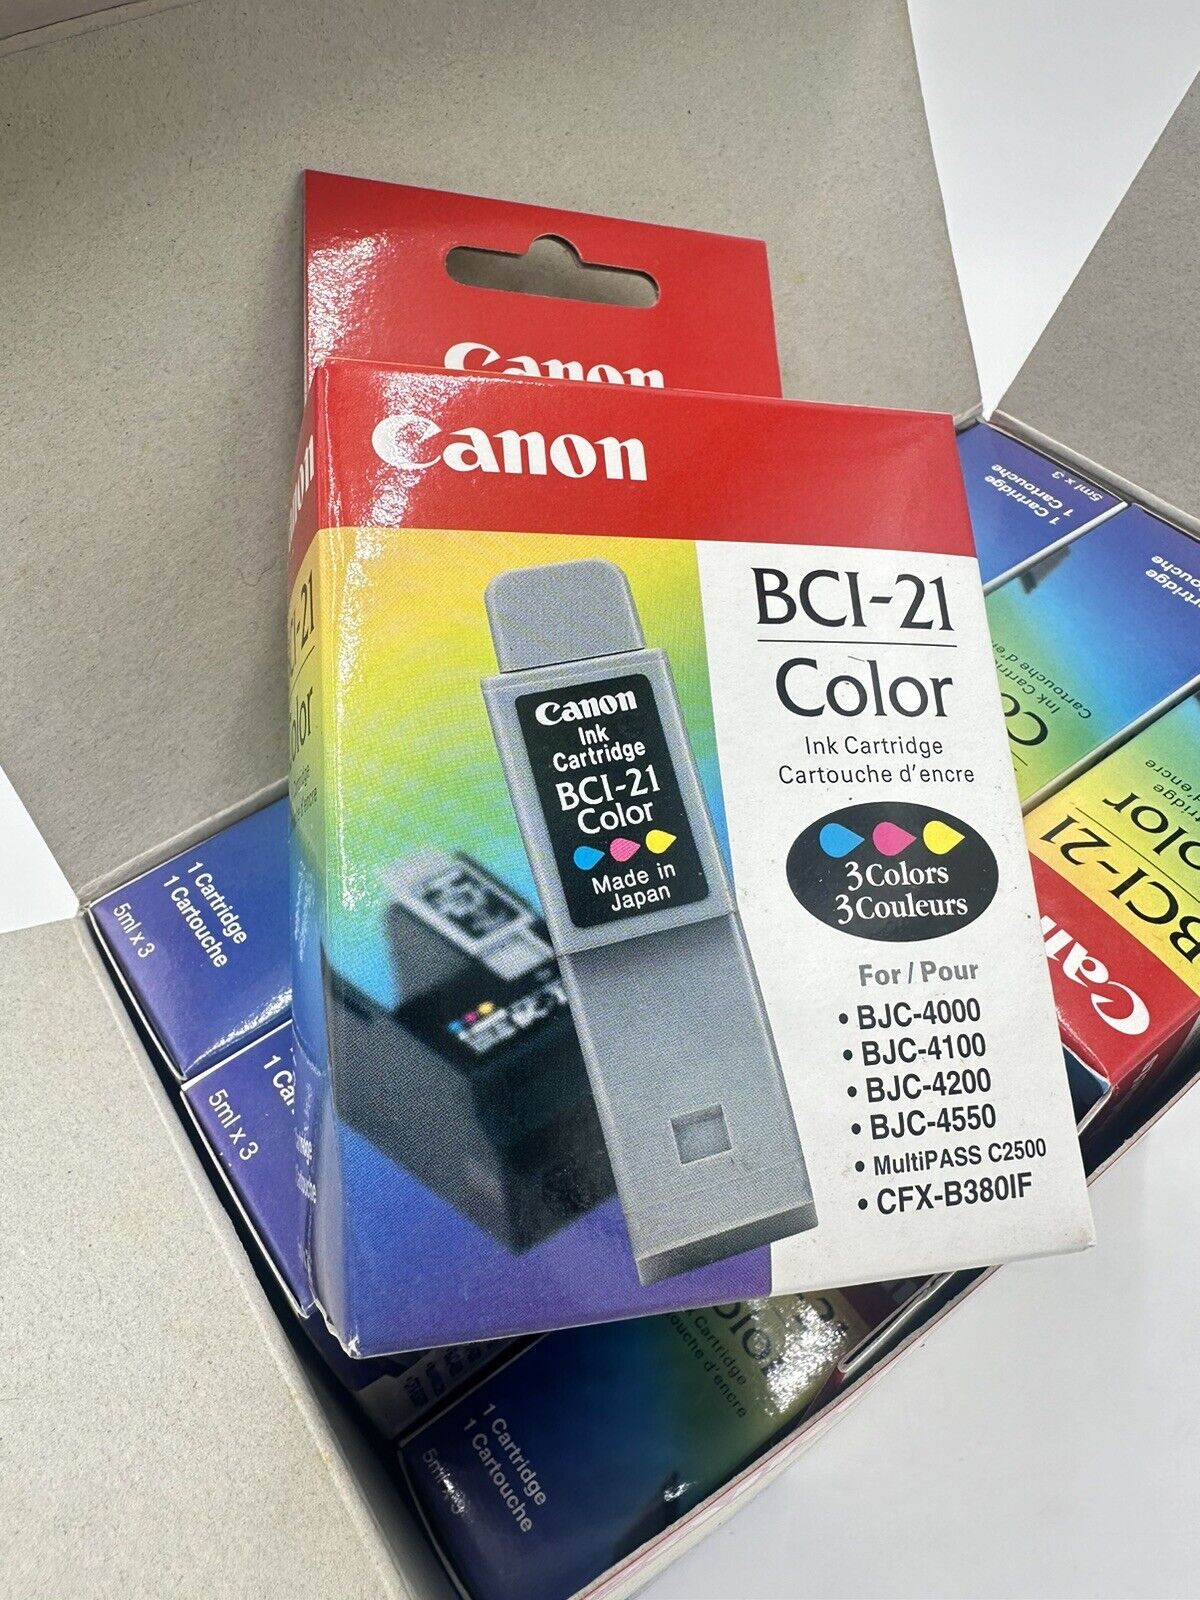 NEW NOS Case Lot of 12 Genuine CANON BCI-21 COLOR Ink Cartridges EXPIRED New